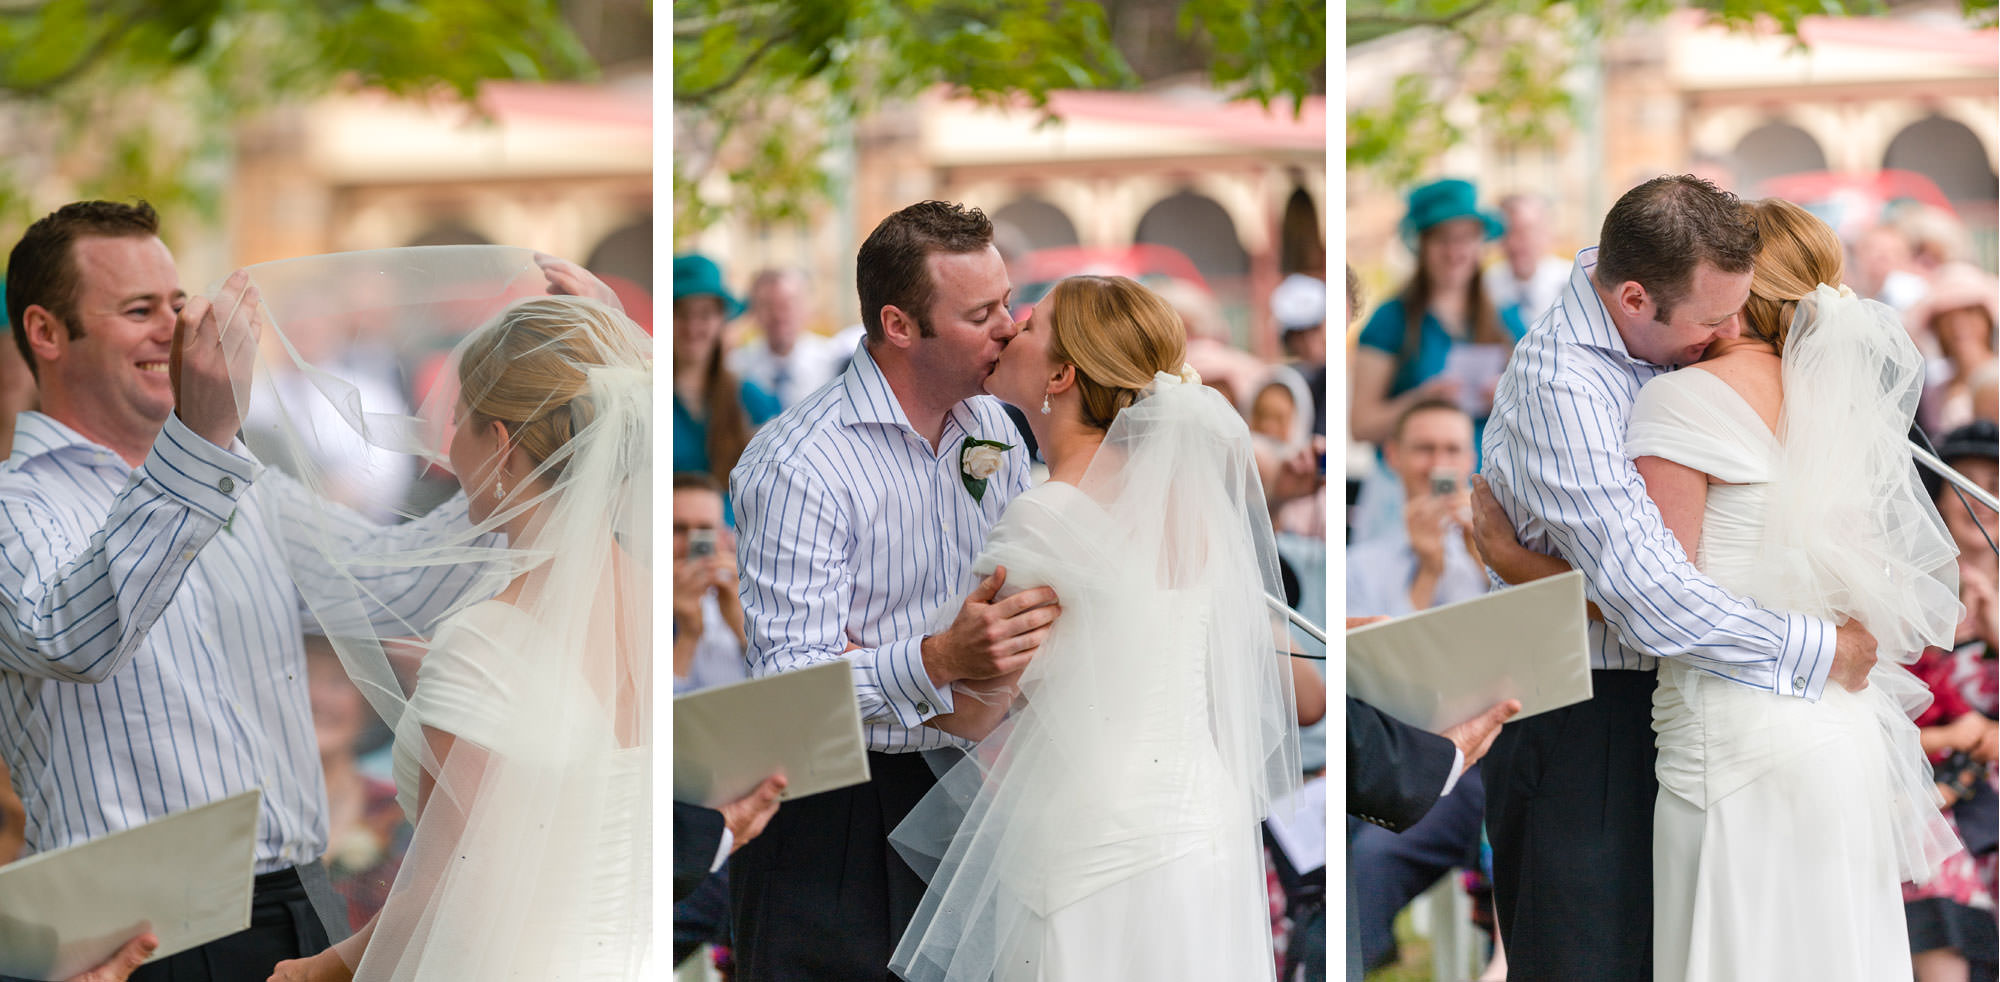 First kiss during wedding ceremony